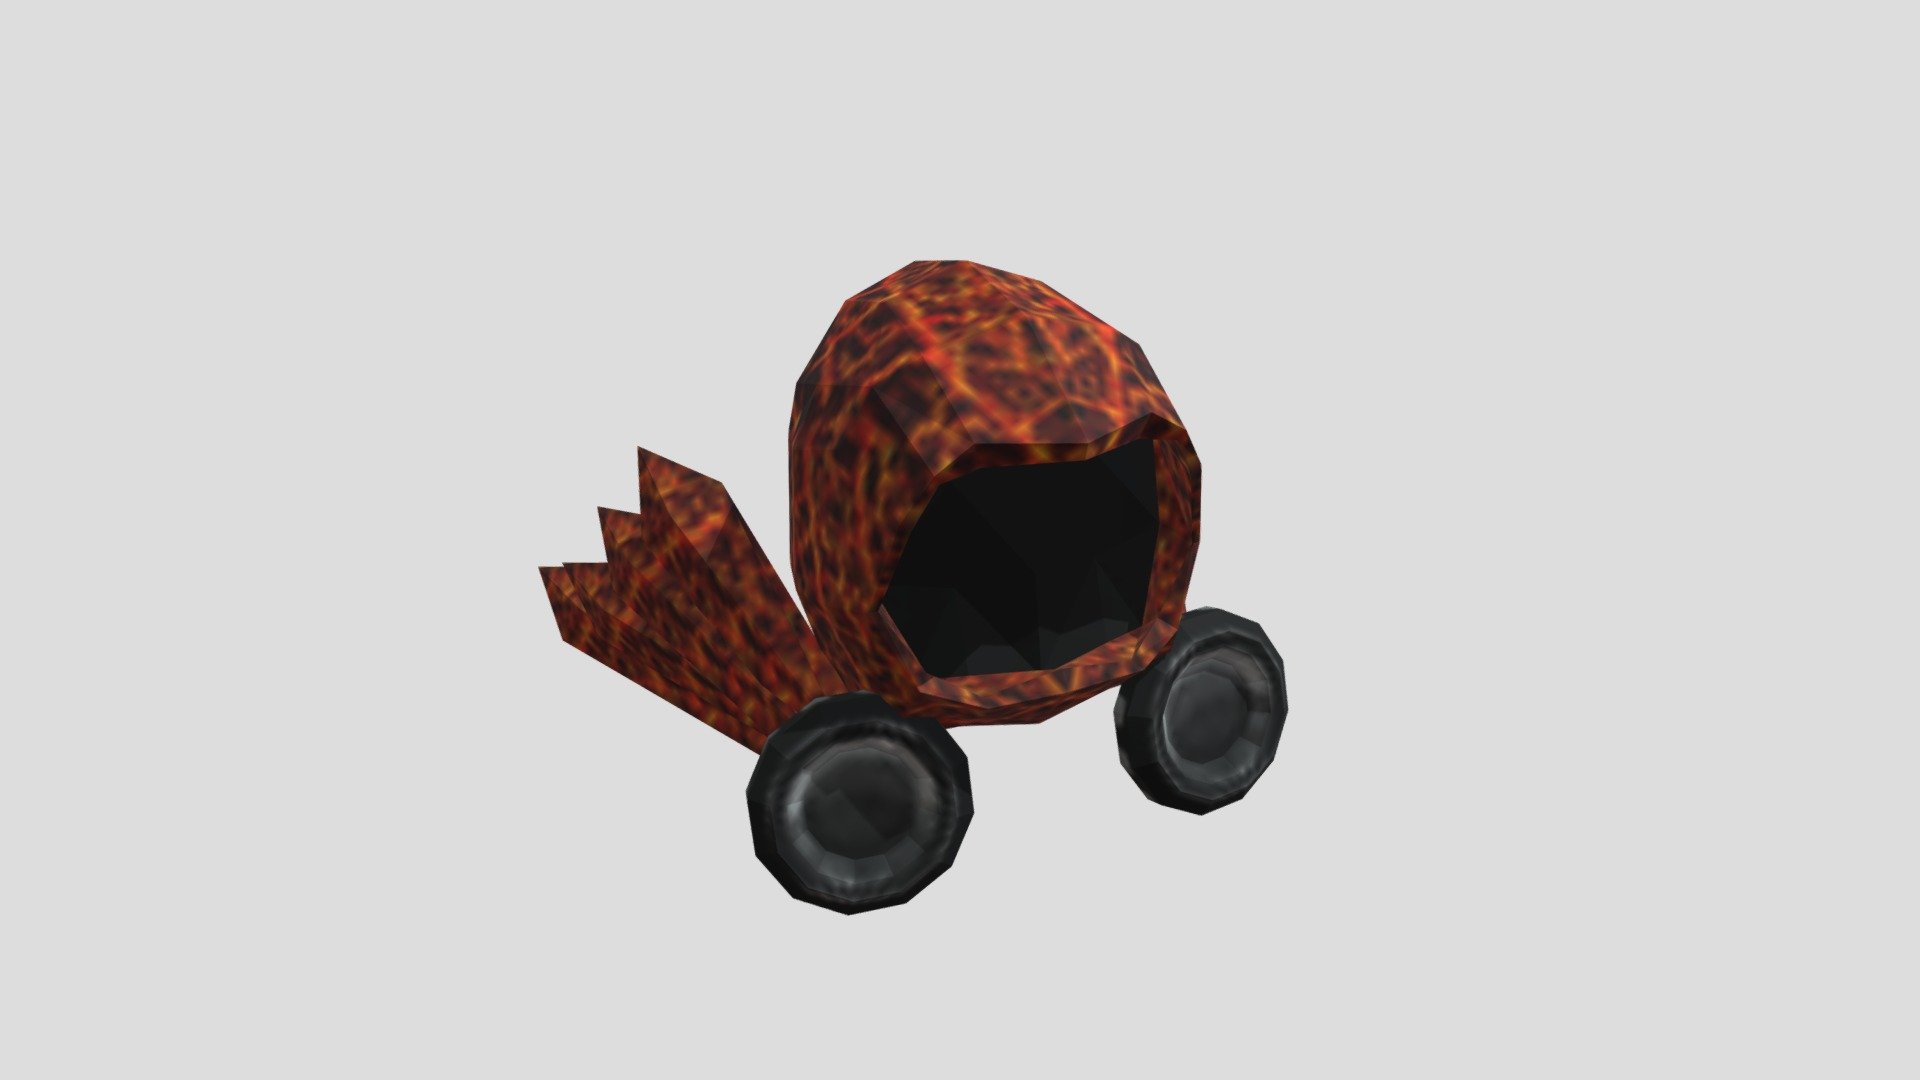 Dominus Roblox Wallpapers - Top Free Dominus Roblox Backgrounds